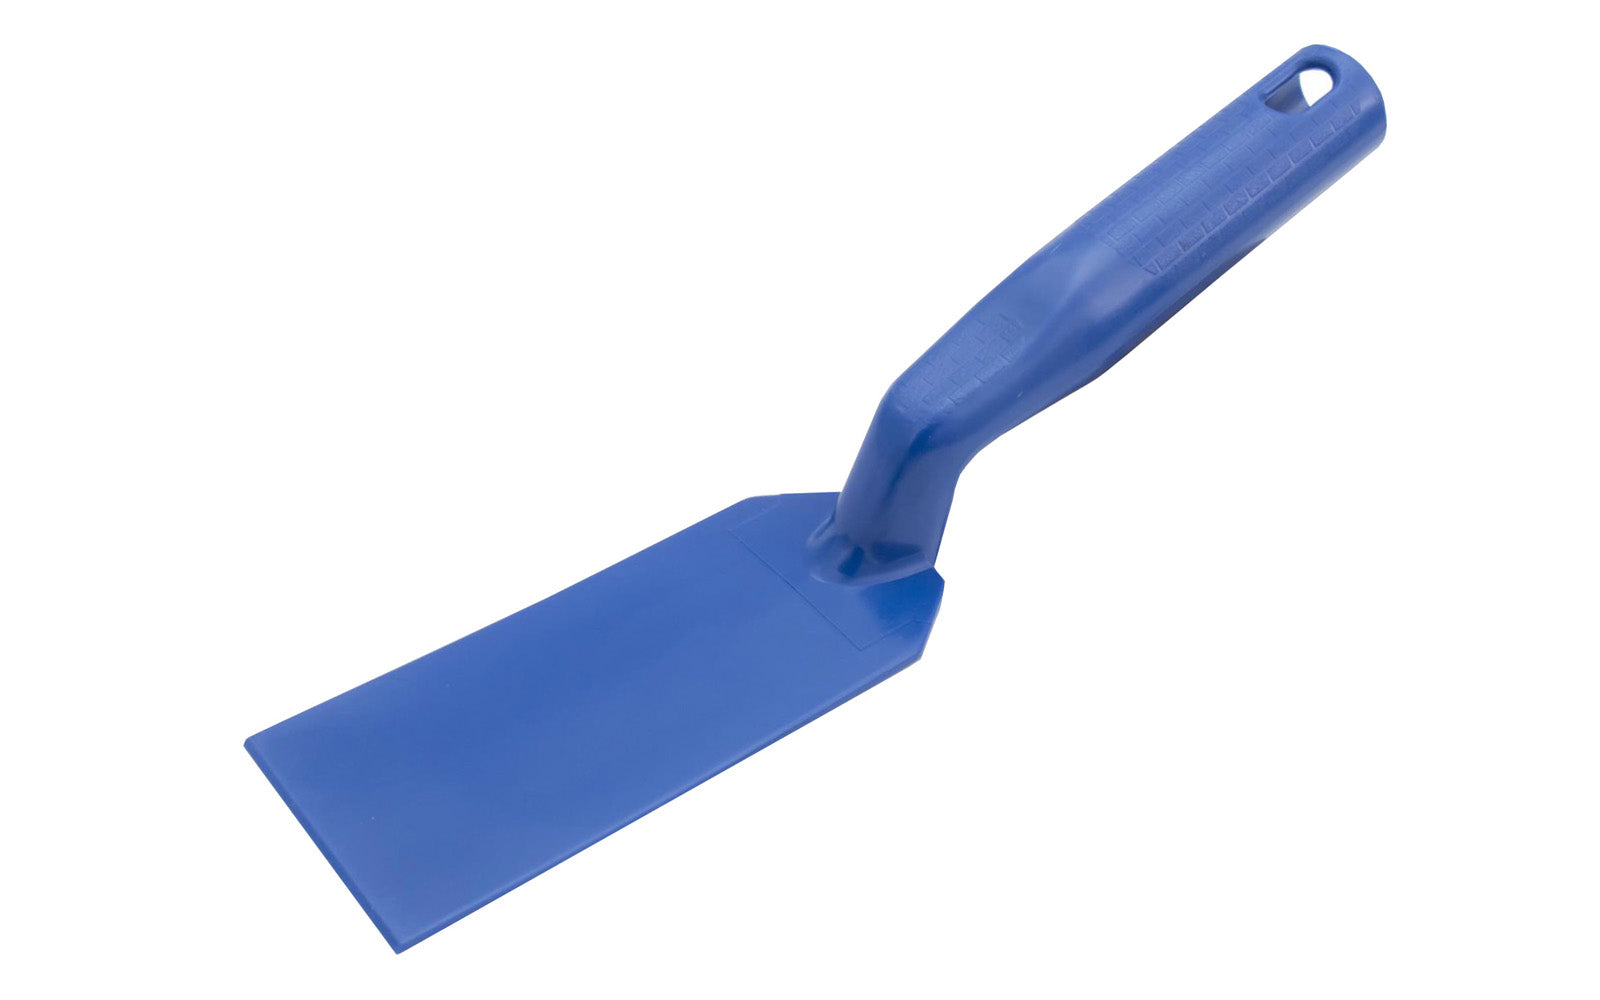 Marshalltown's contractor-grade, Single-Use Trowel comes in durable plastic that won't rust or corrode. Designed for one time use. 035965062800. Model PMT280. 16280. Marshalltown Single-Use Trowel